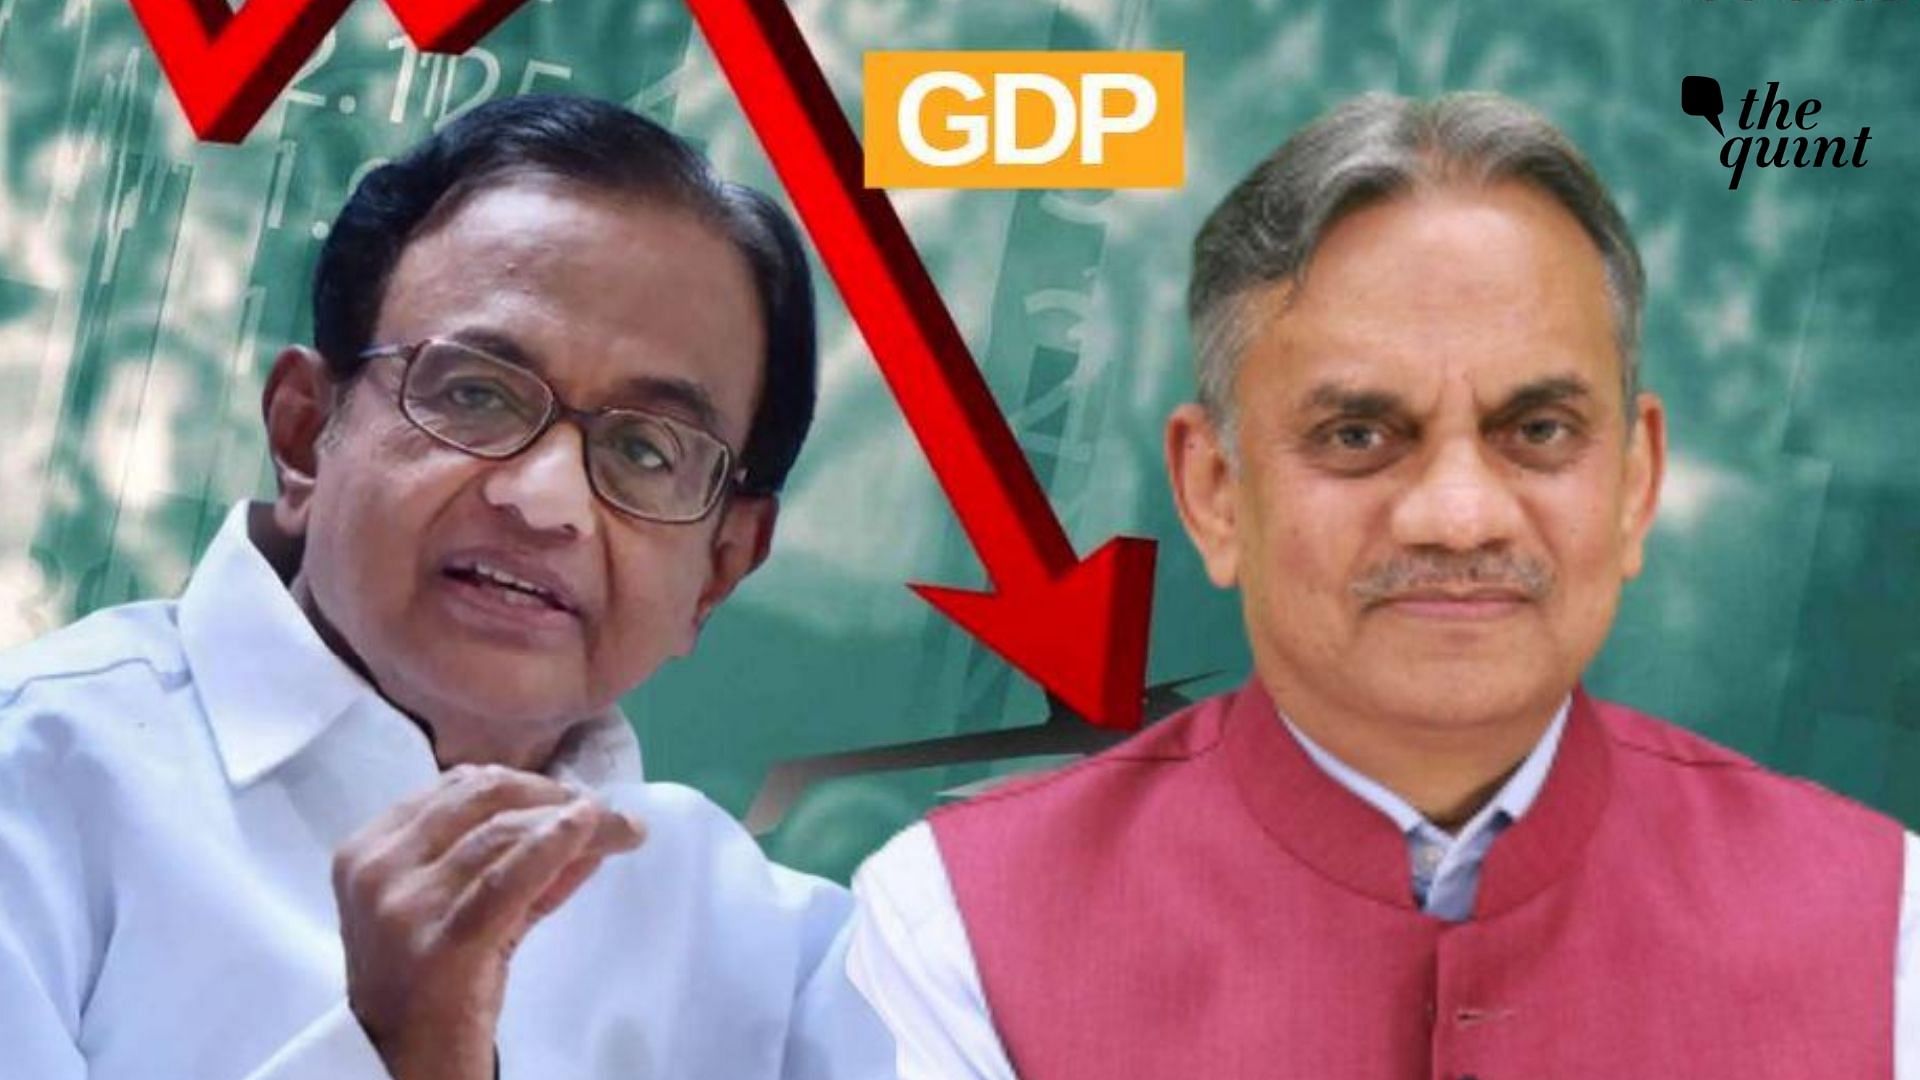 Speaking to The Quint‘s Editorial Director Sanjay Pugalia, Chidambaram said that the Modi government’s mismanagement of the pandemic and the economy has plunged millions into poverty.